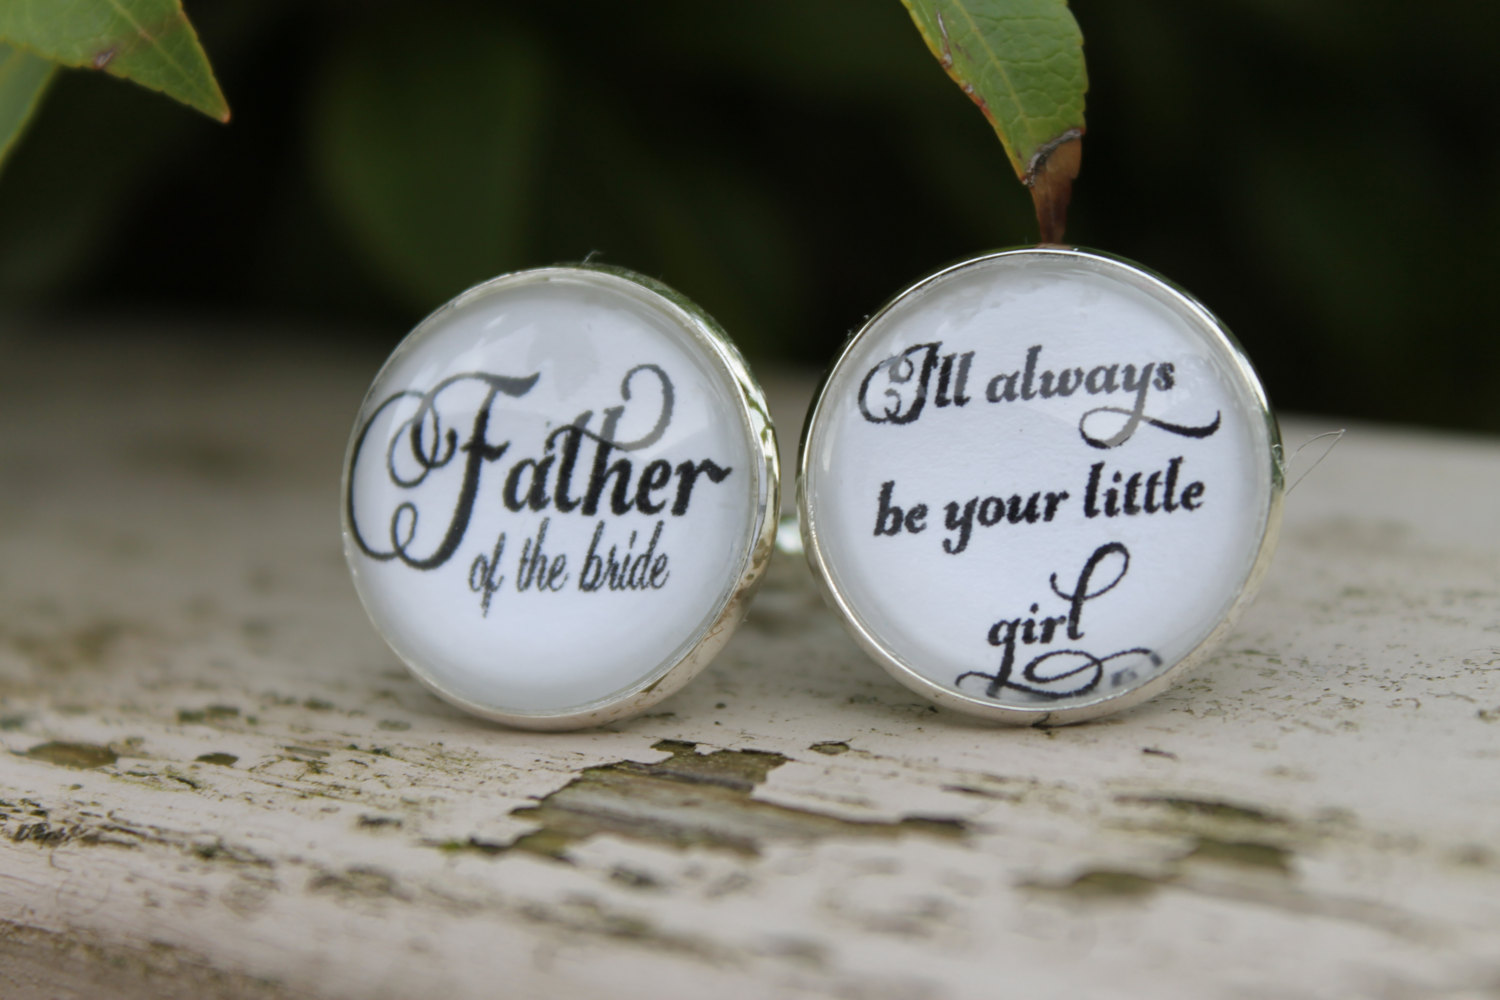 father of the bride cuff links always be your little girl